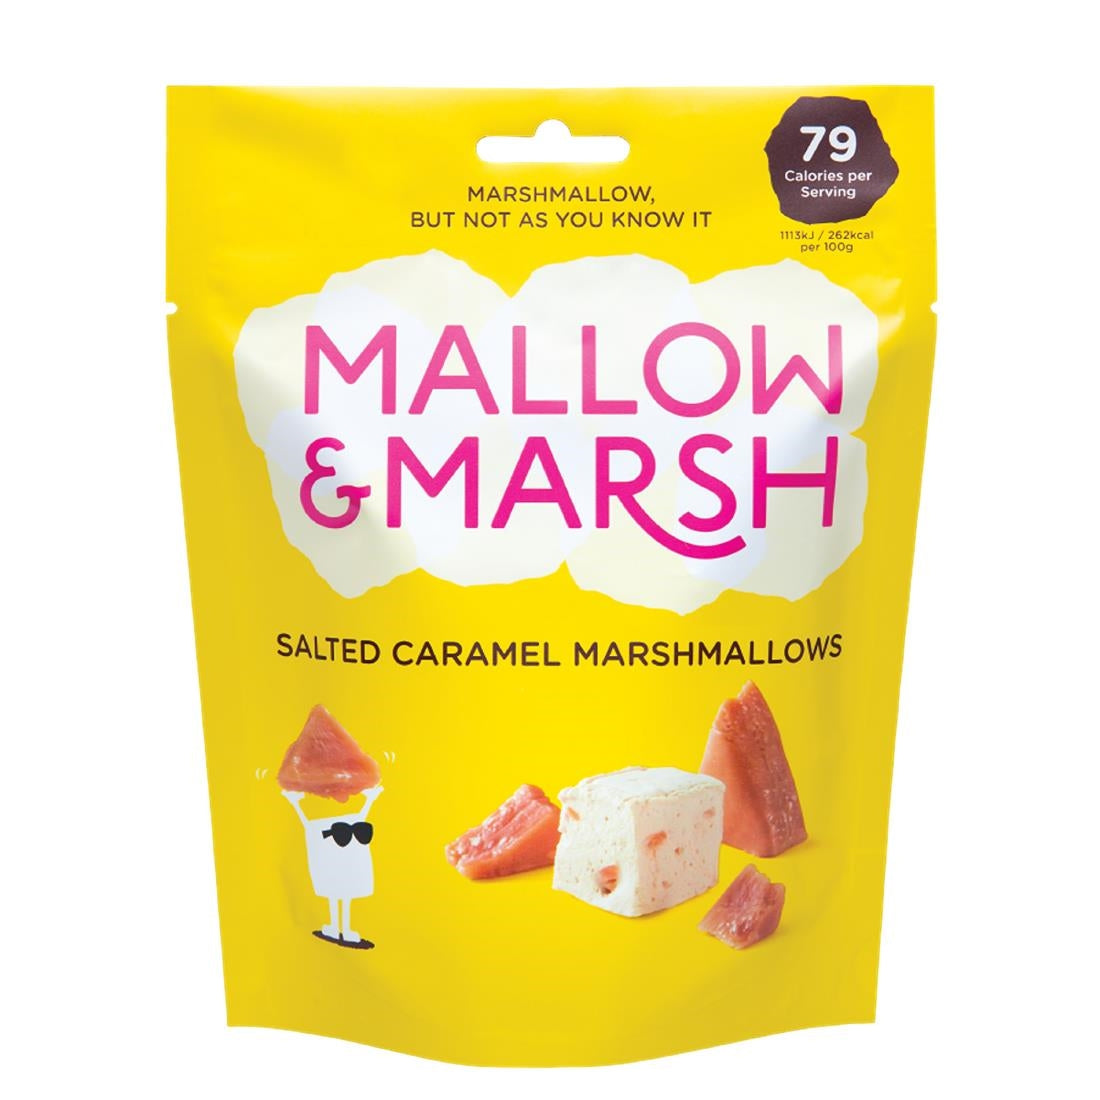 HS838 Mallow & Marsh Salted Caramel Marshmallow Pouches 100g (Pack of 6)